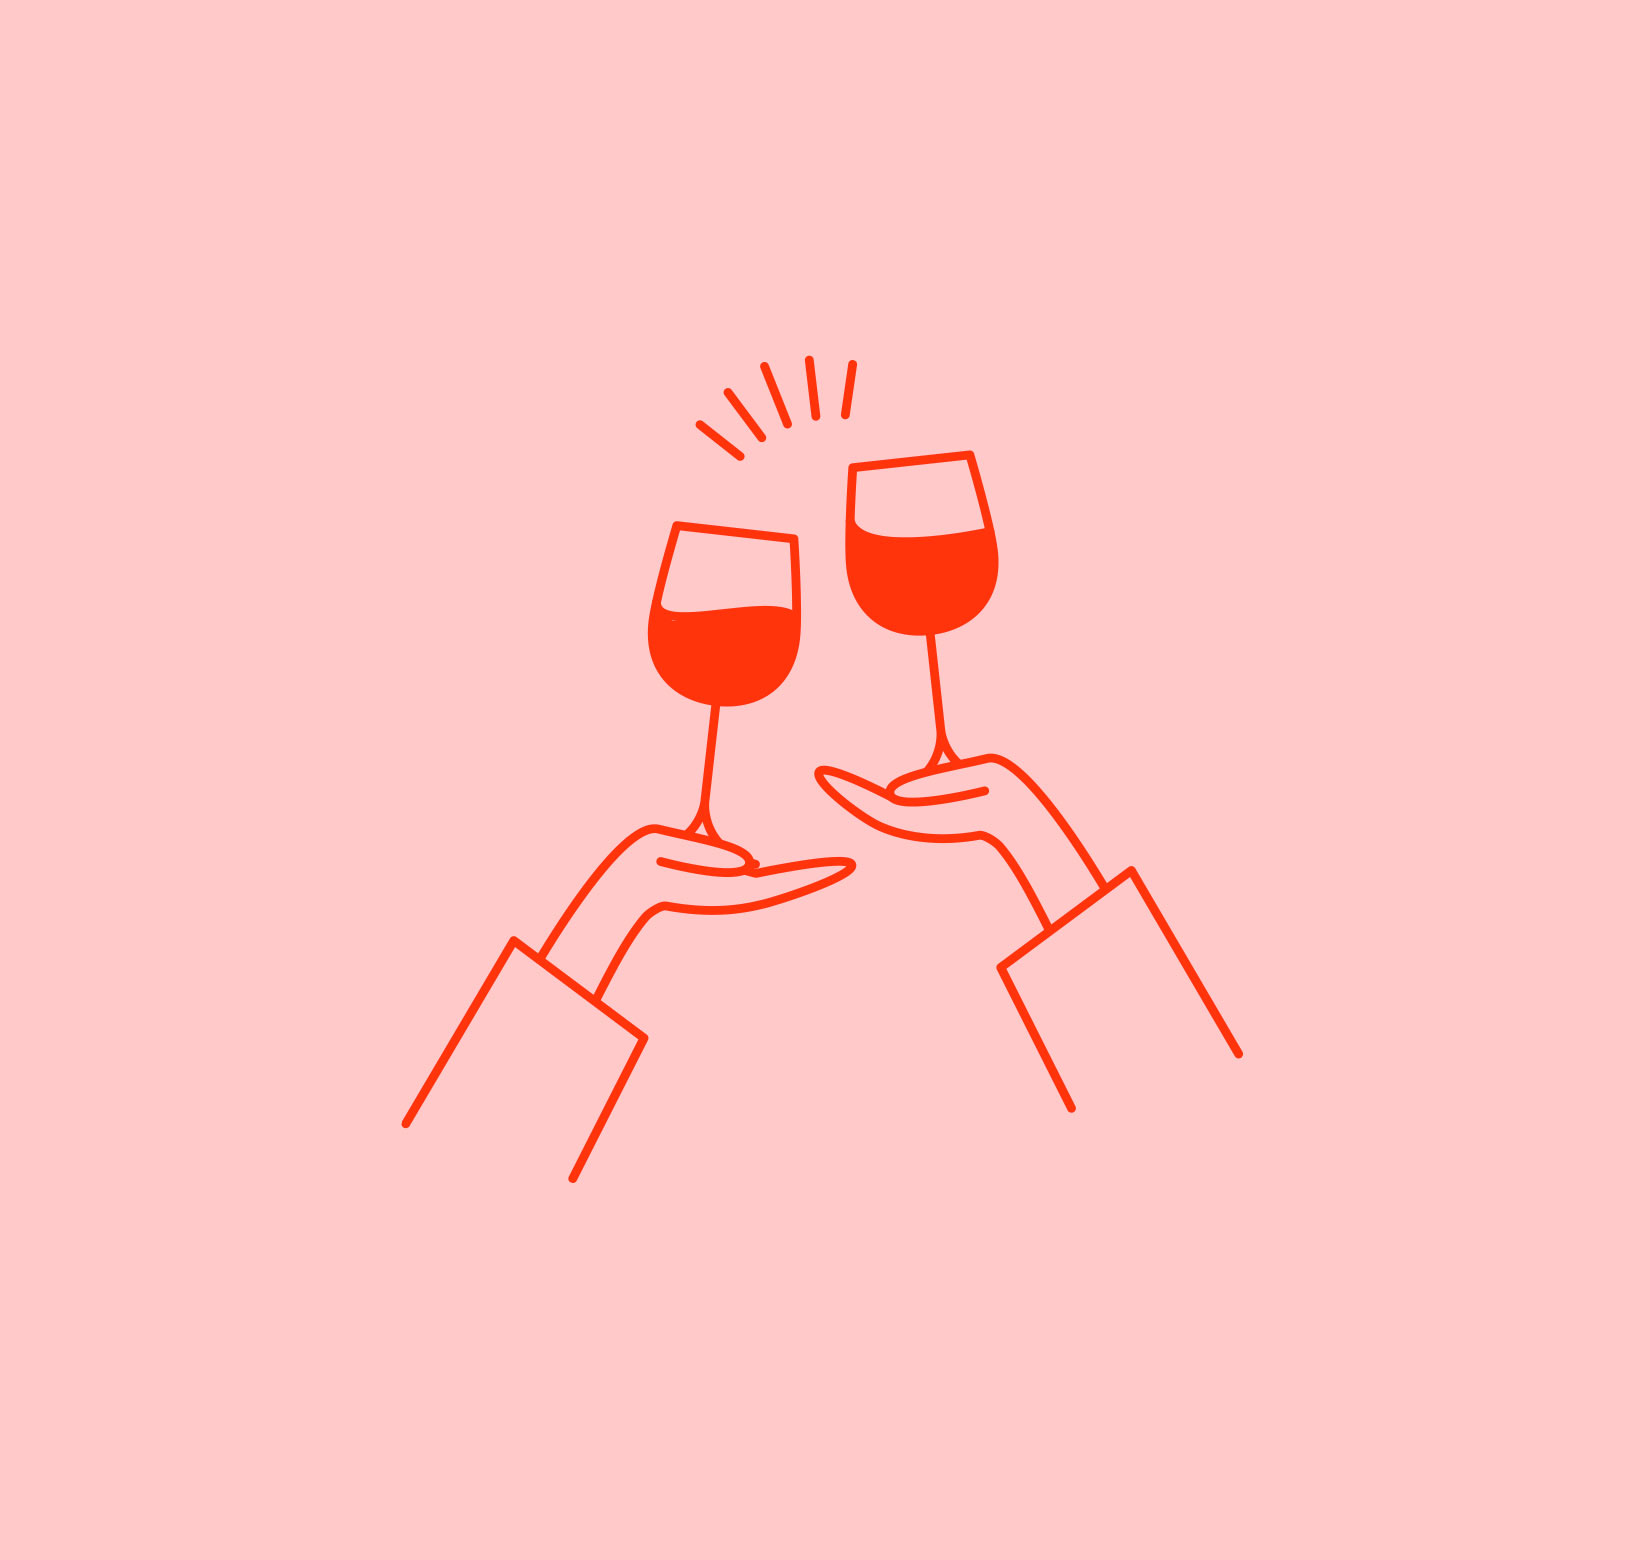 An illustration of two hands holding wine-glasses and clinking them together.